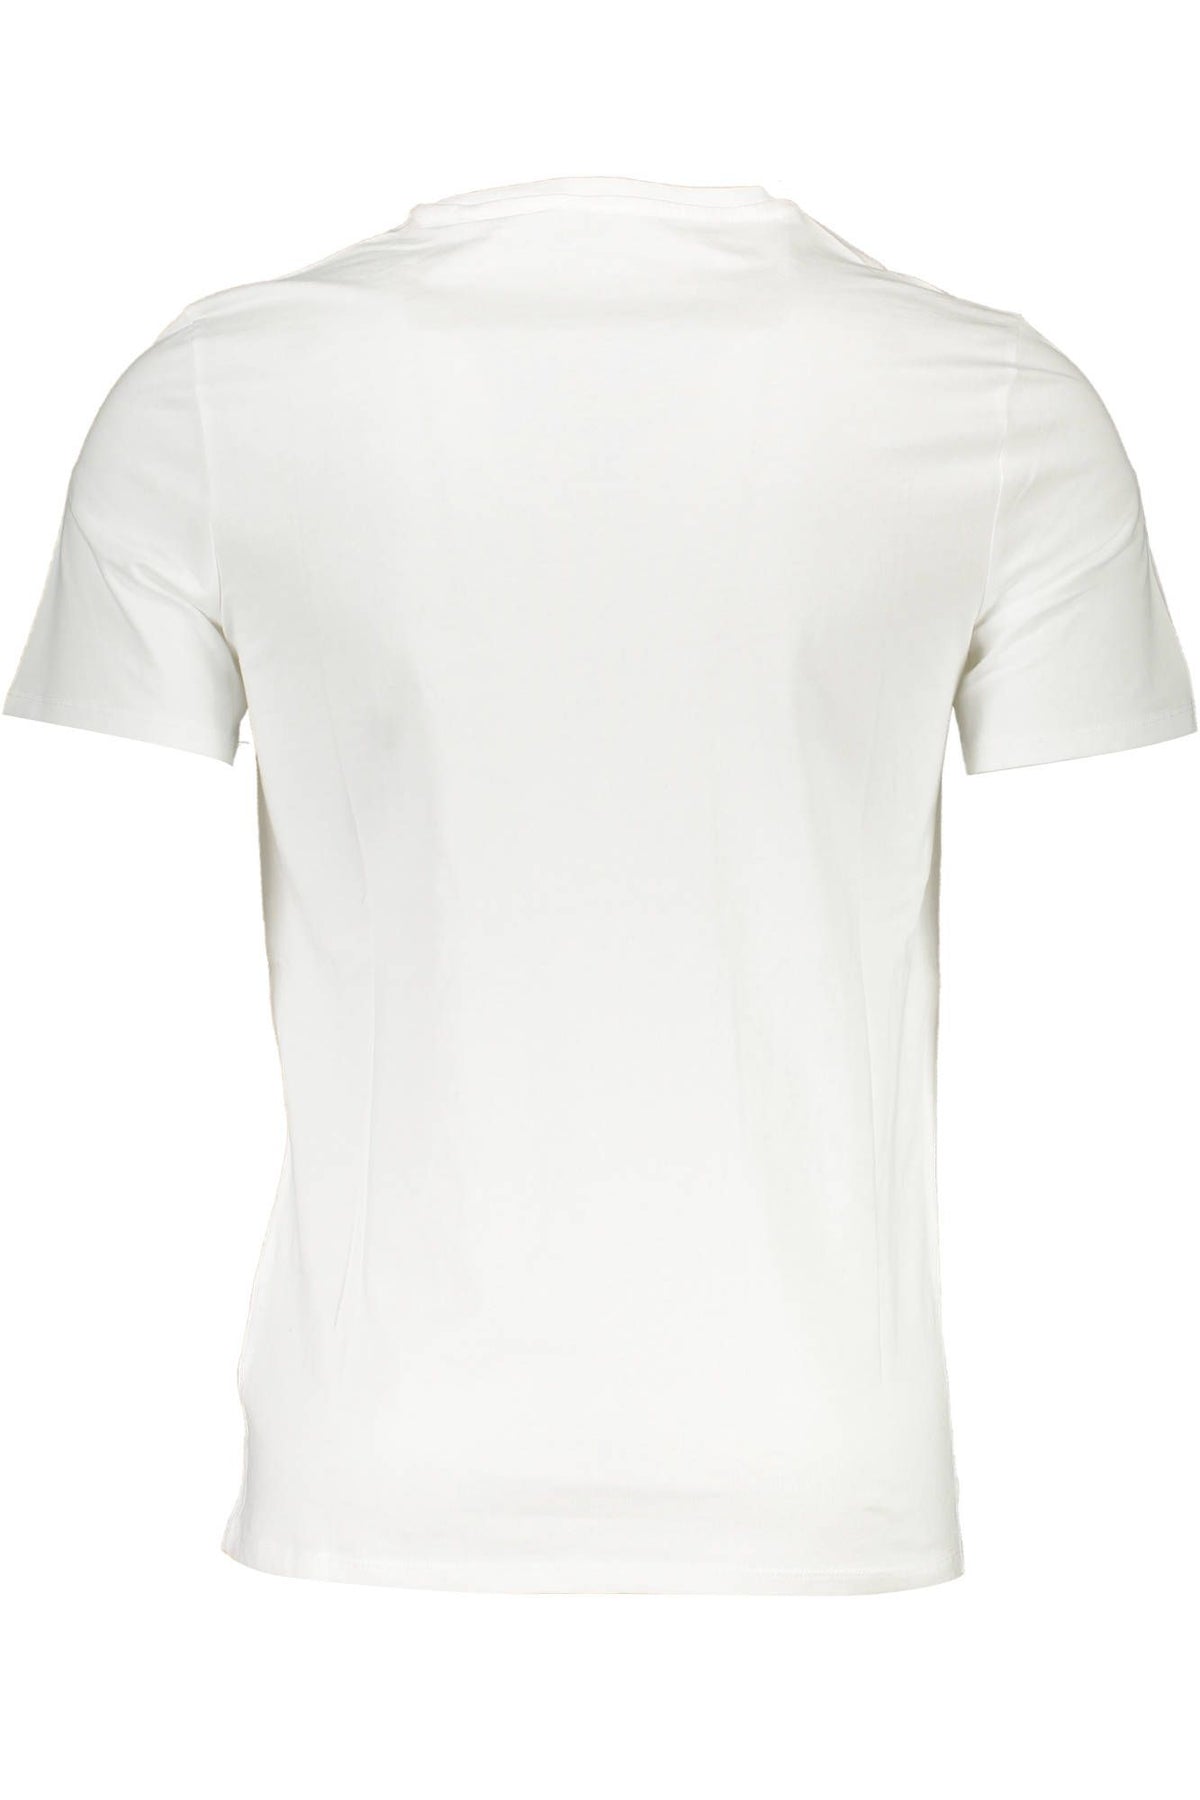 Guess Jeans Chic White Organic Cotton Tee with Logo